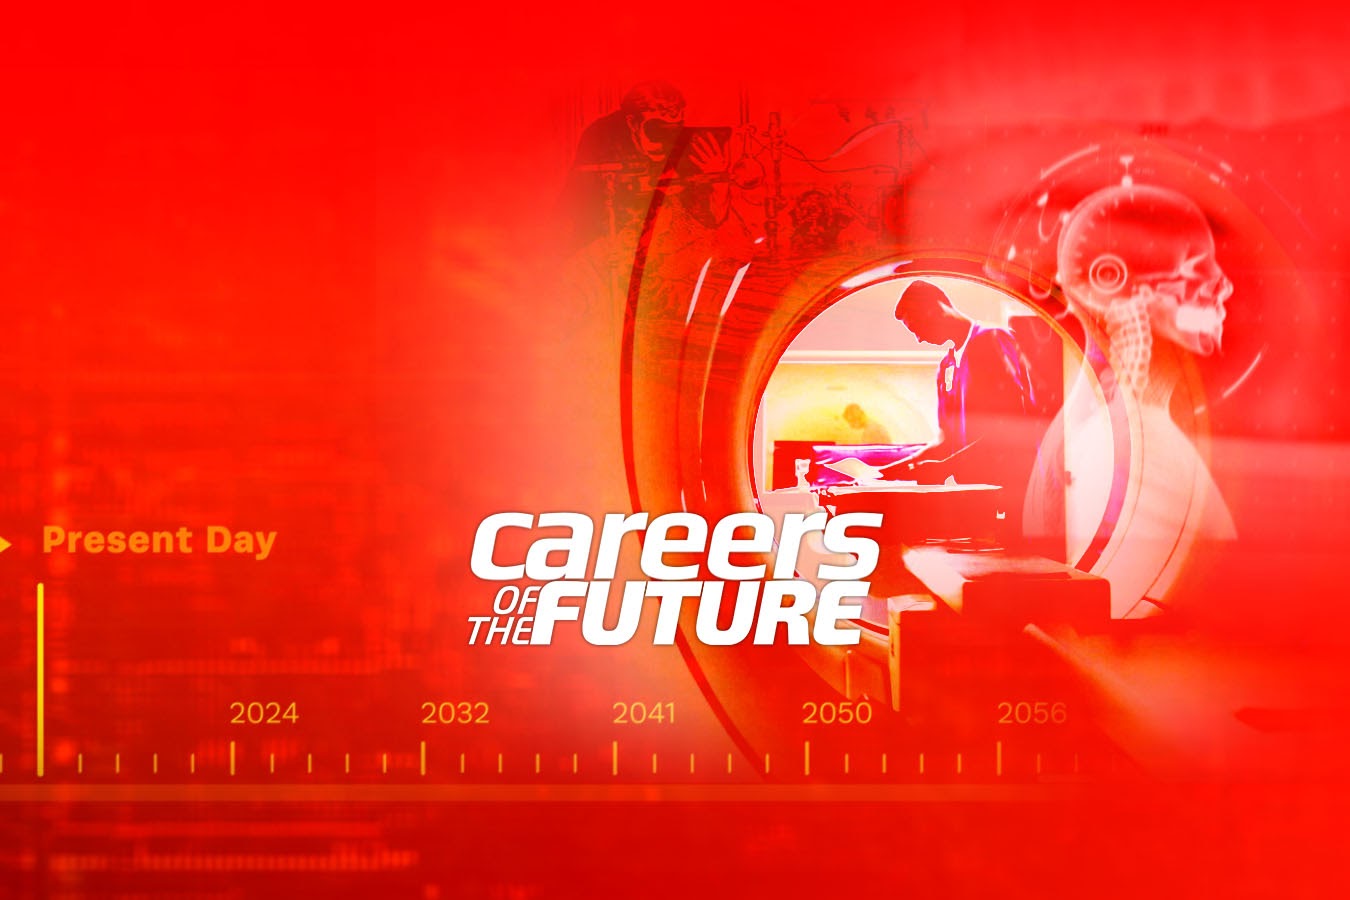 What Are the Careers of the Future? Find Out With This New Series